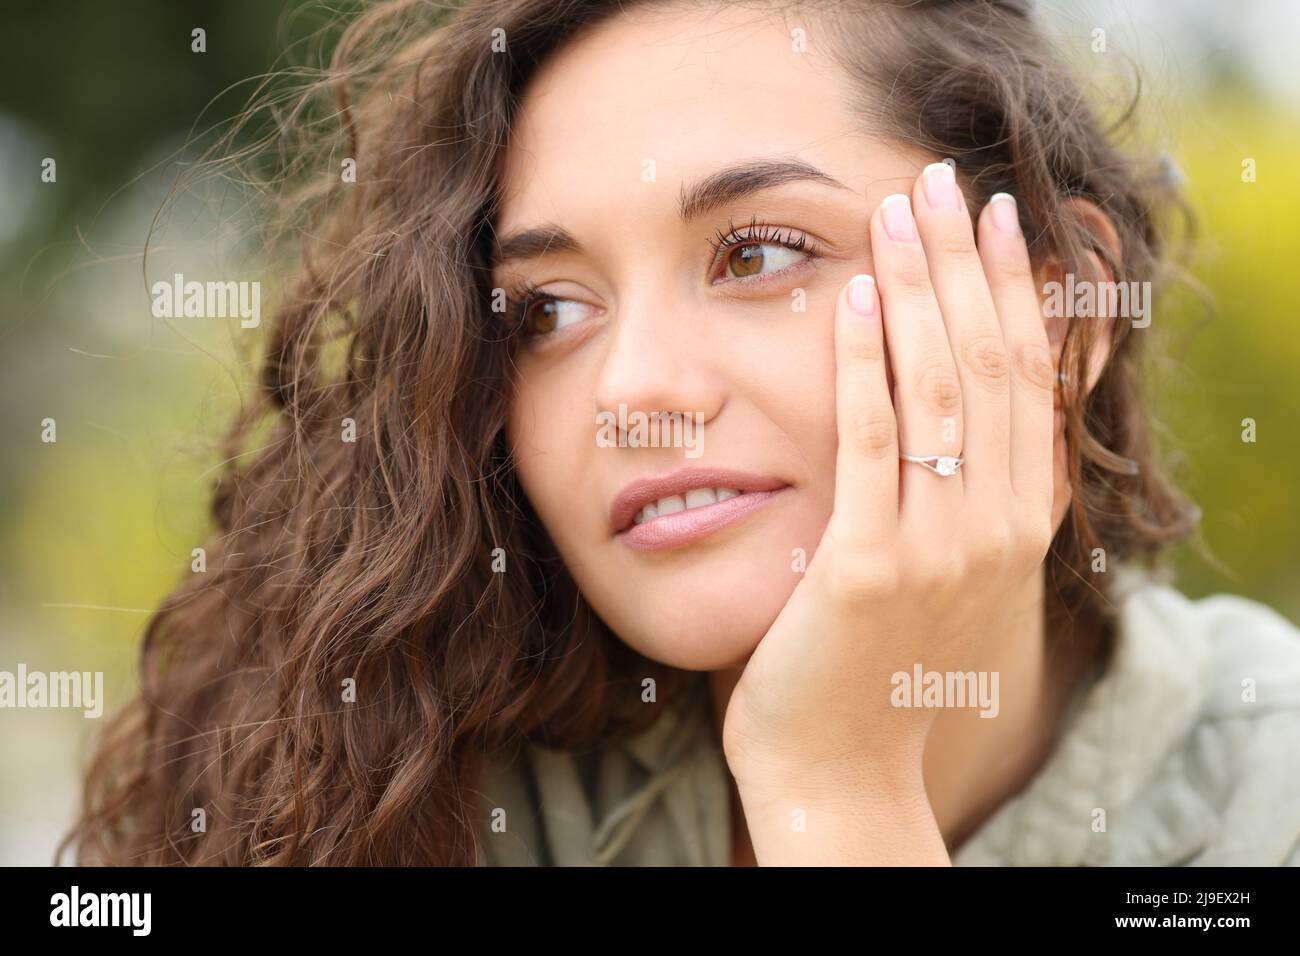 Confident woman showing engagement ring looking at side after proposal Stock Photo